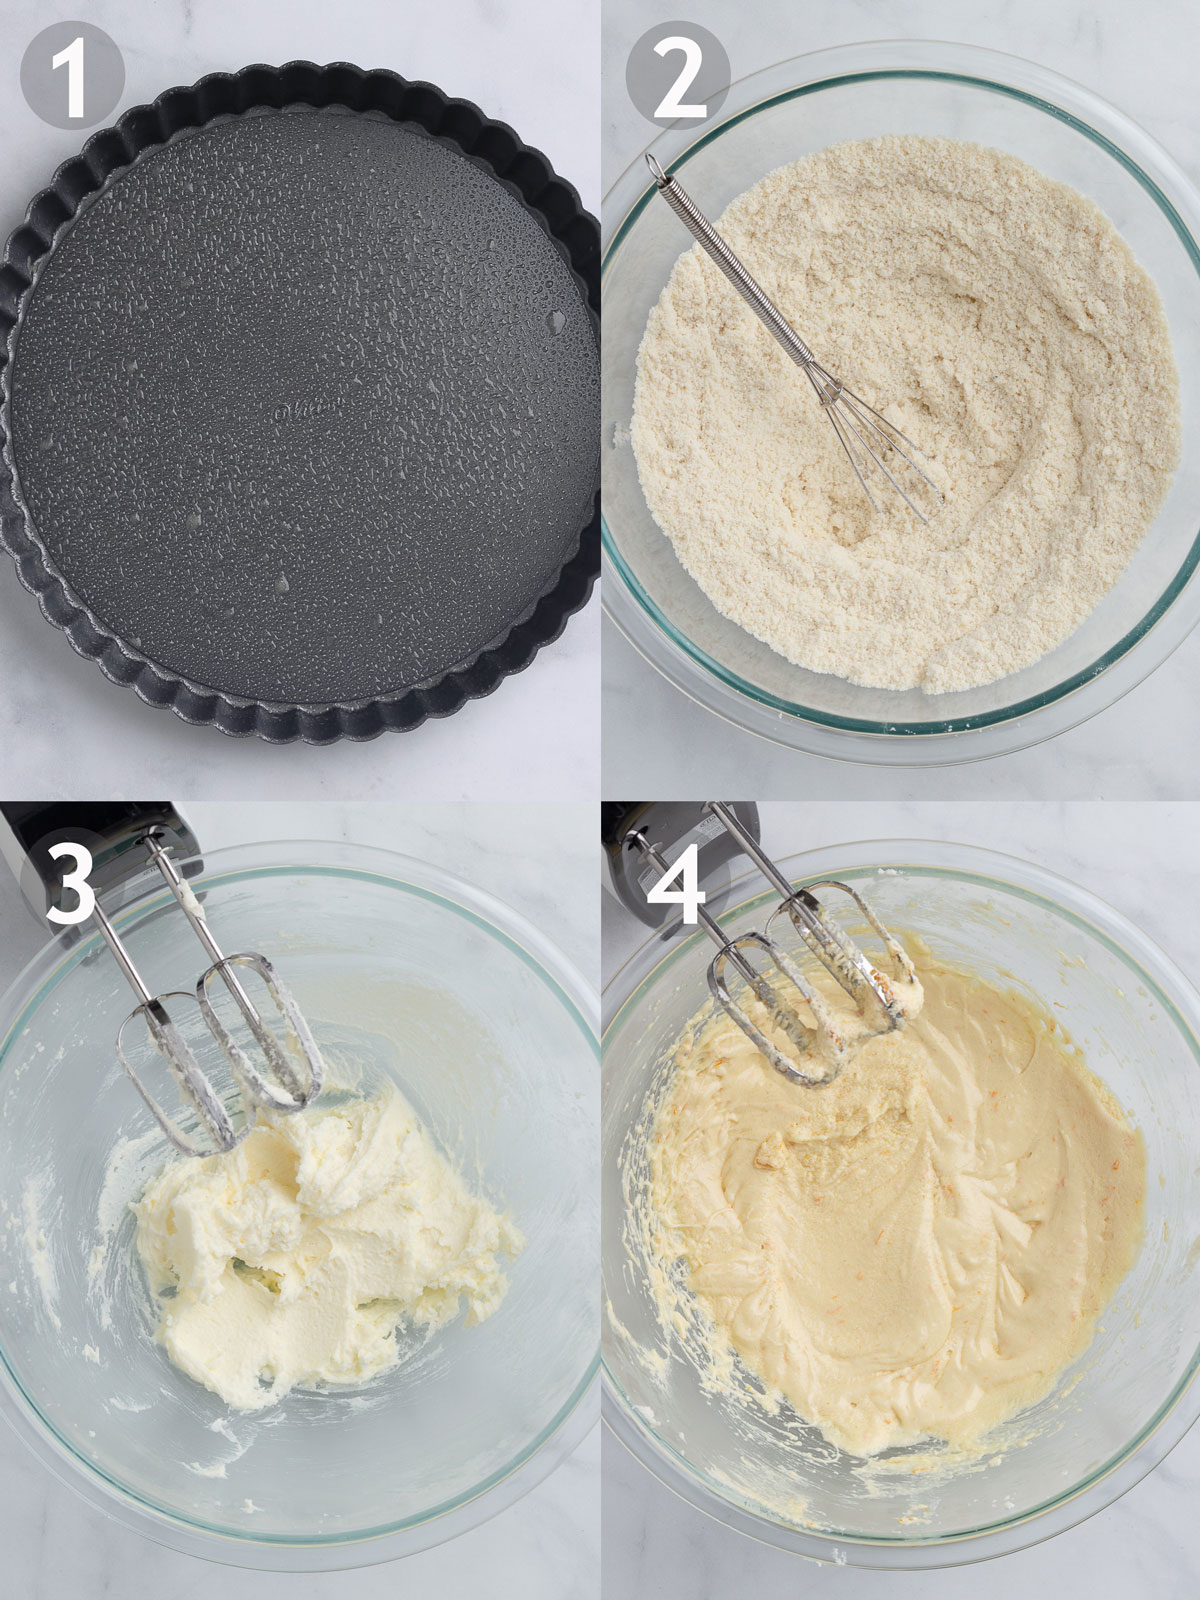 Cake steps 1-4 including greasing tart pan, whisking dry ingredients, and creaming butter, sugar and eggs.